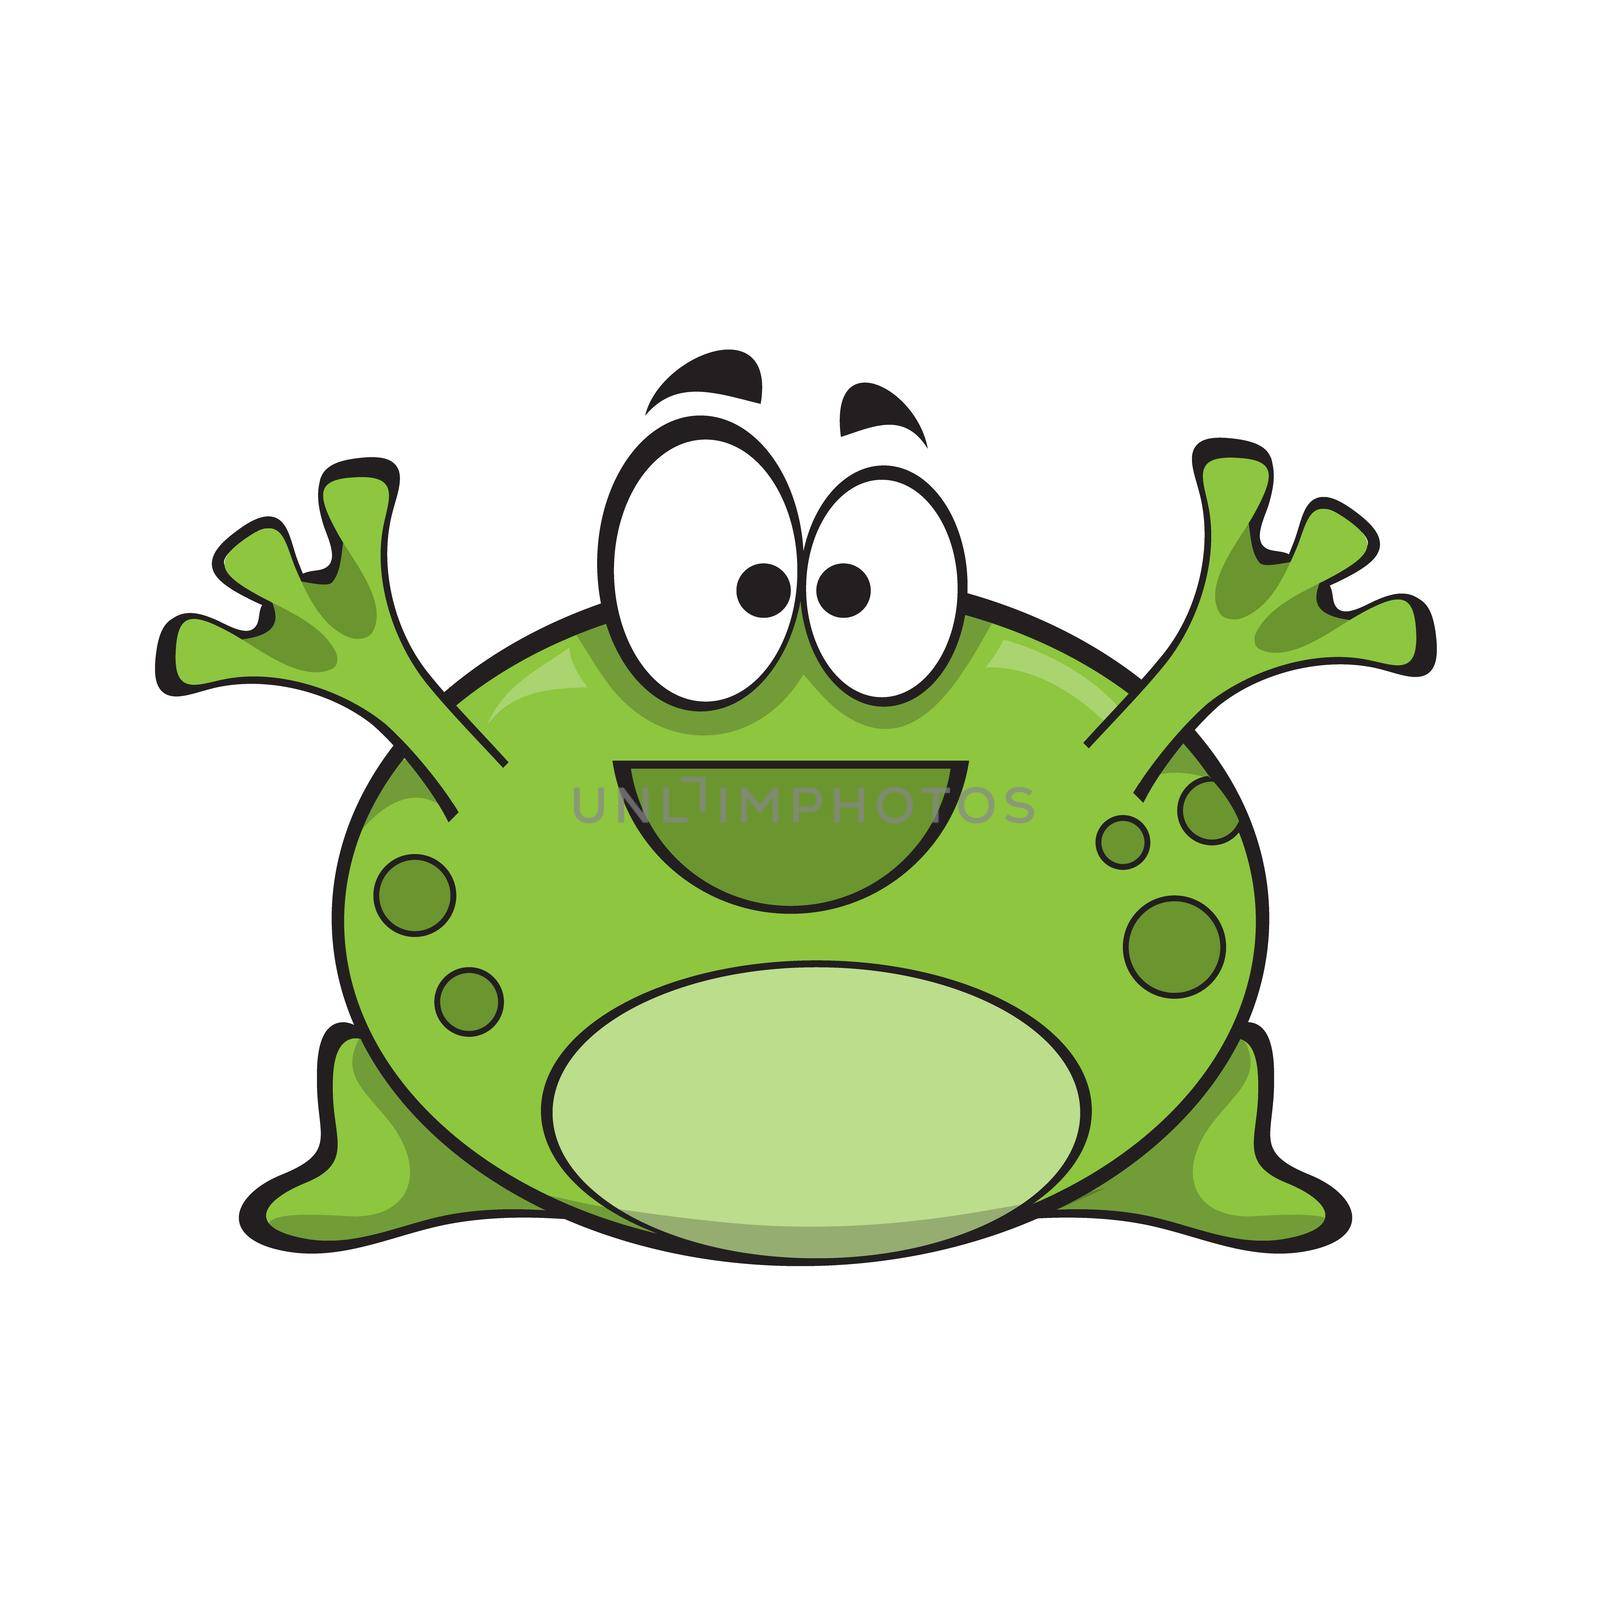 Cute smiling green frog, cartoon character isolated on white background